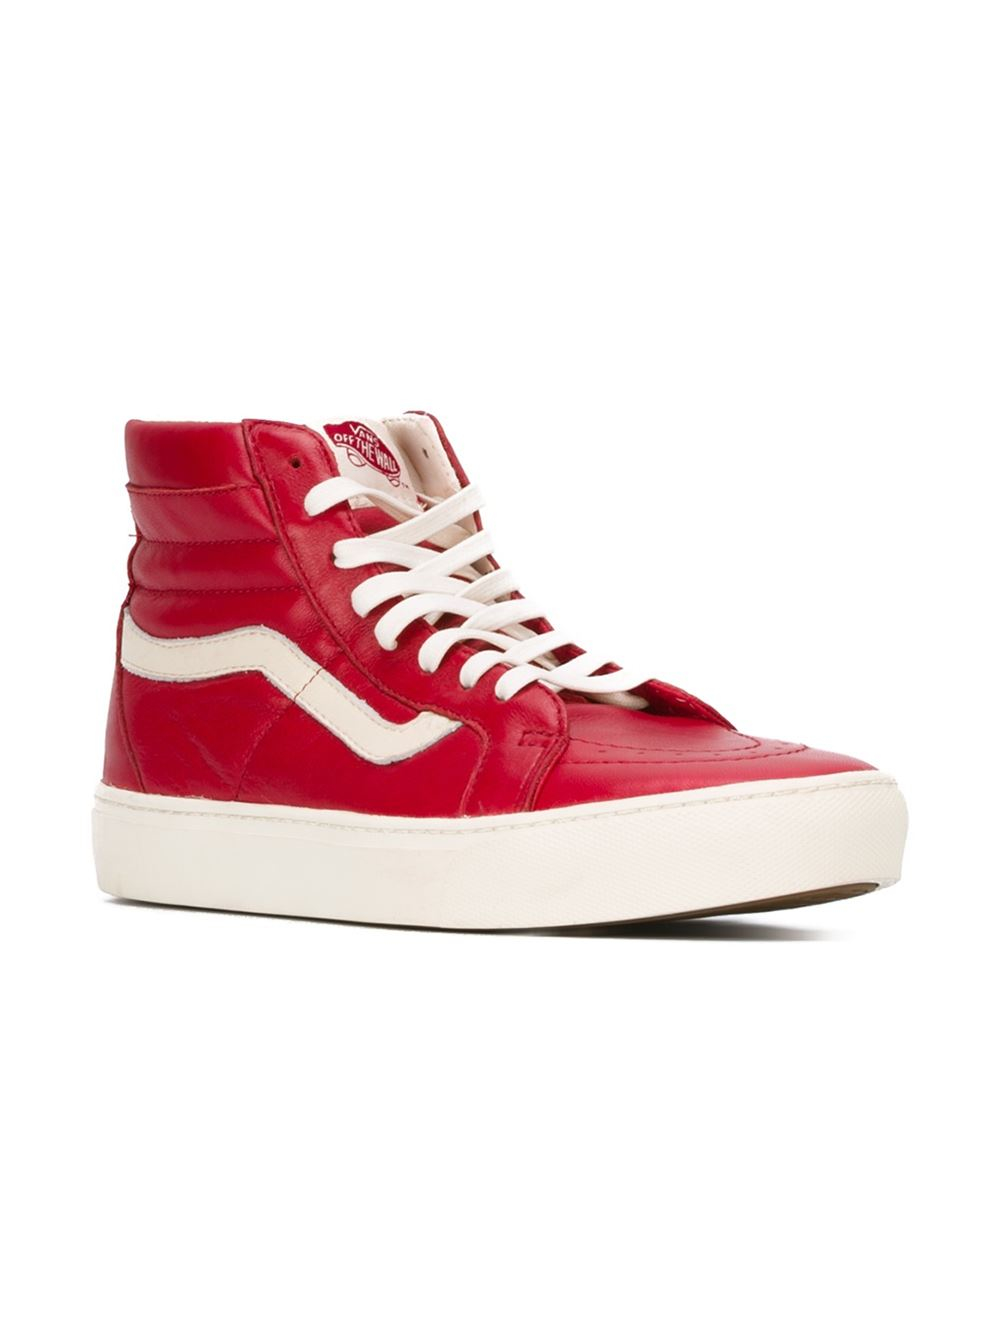 Lyst - Vans Quilted-Leather High-Top Sneakers in Red for Men